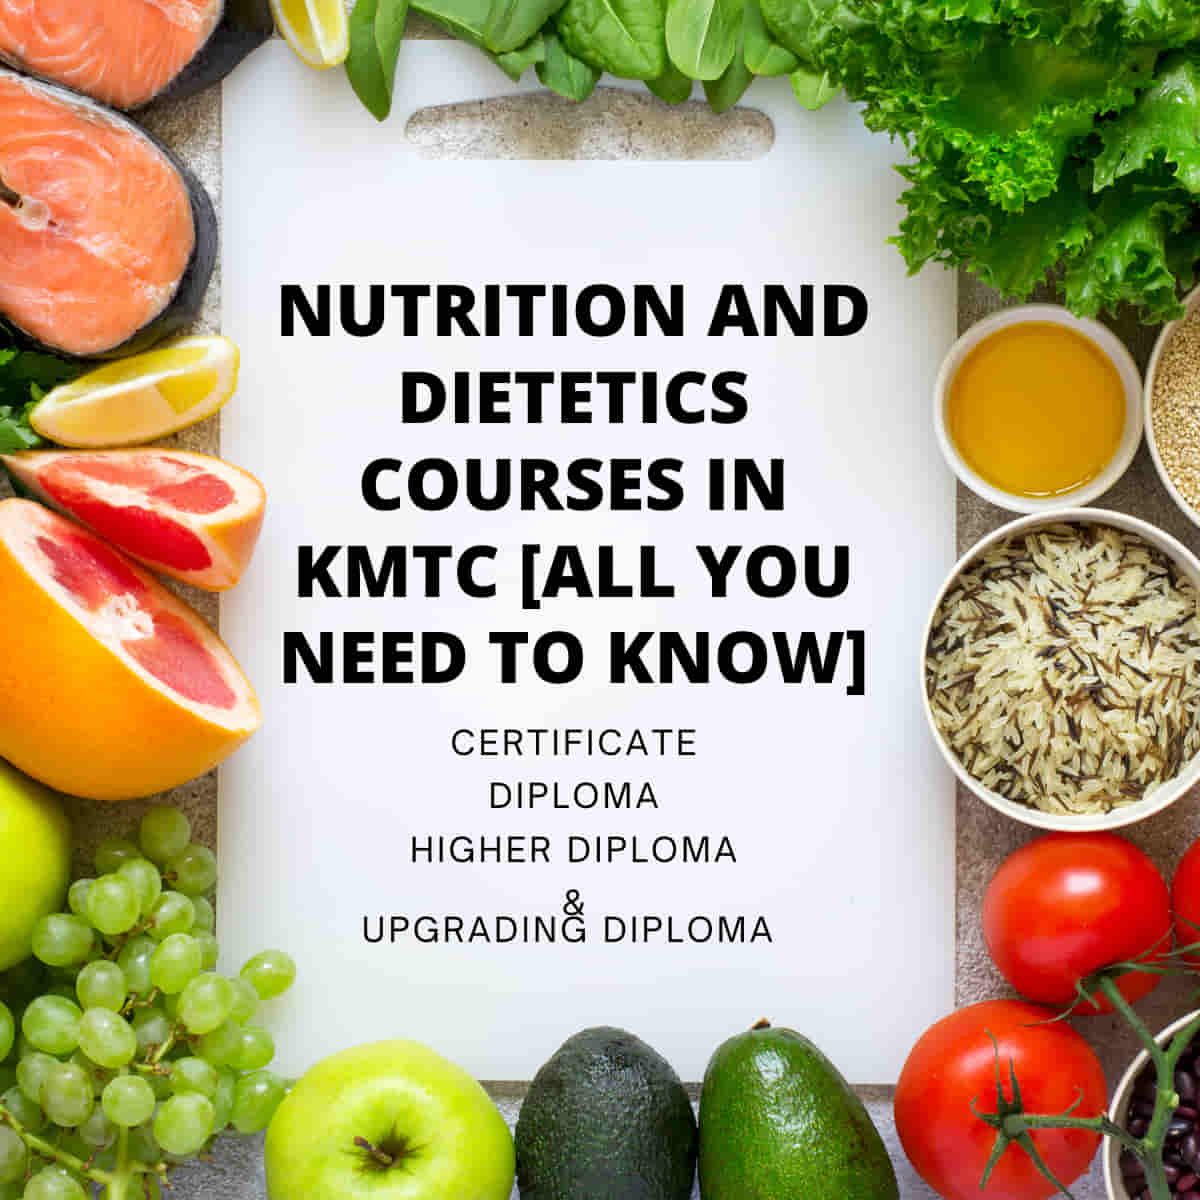 Nutrition and dietetics courses in KMTC [All you need to know]